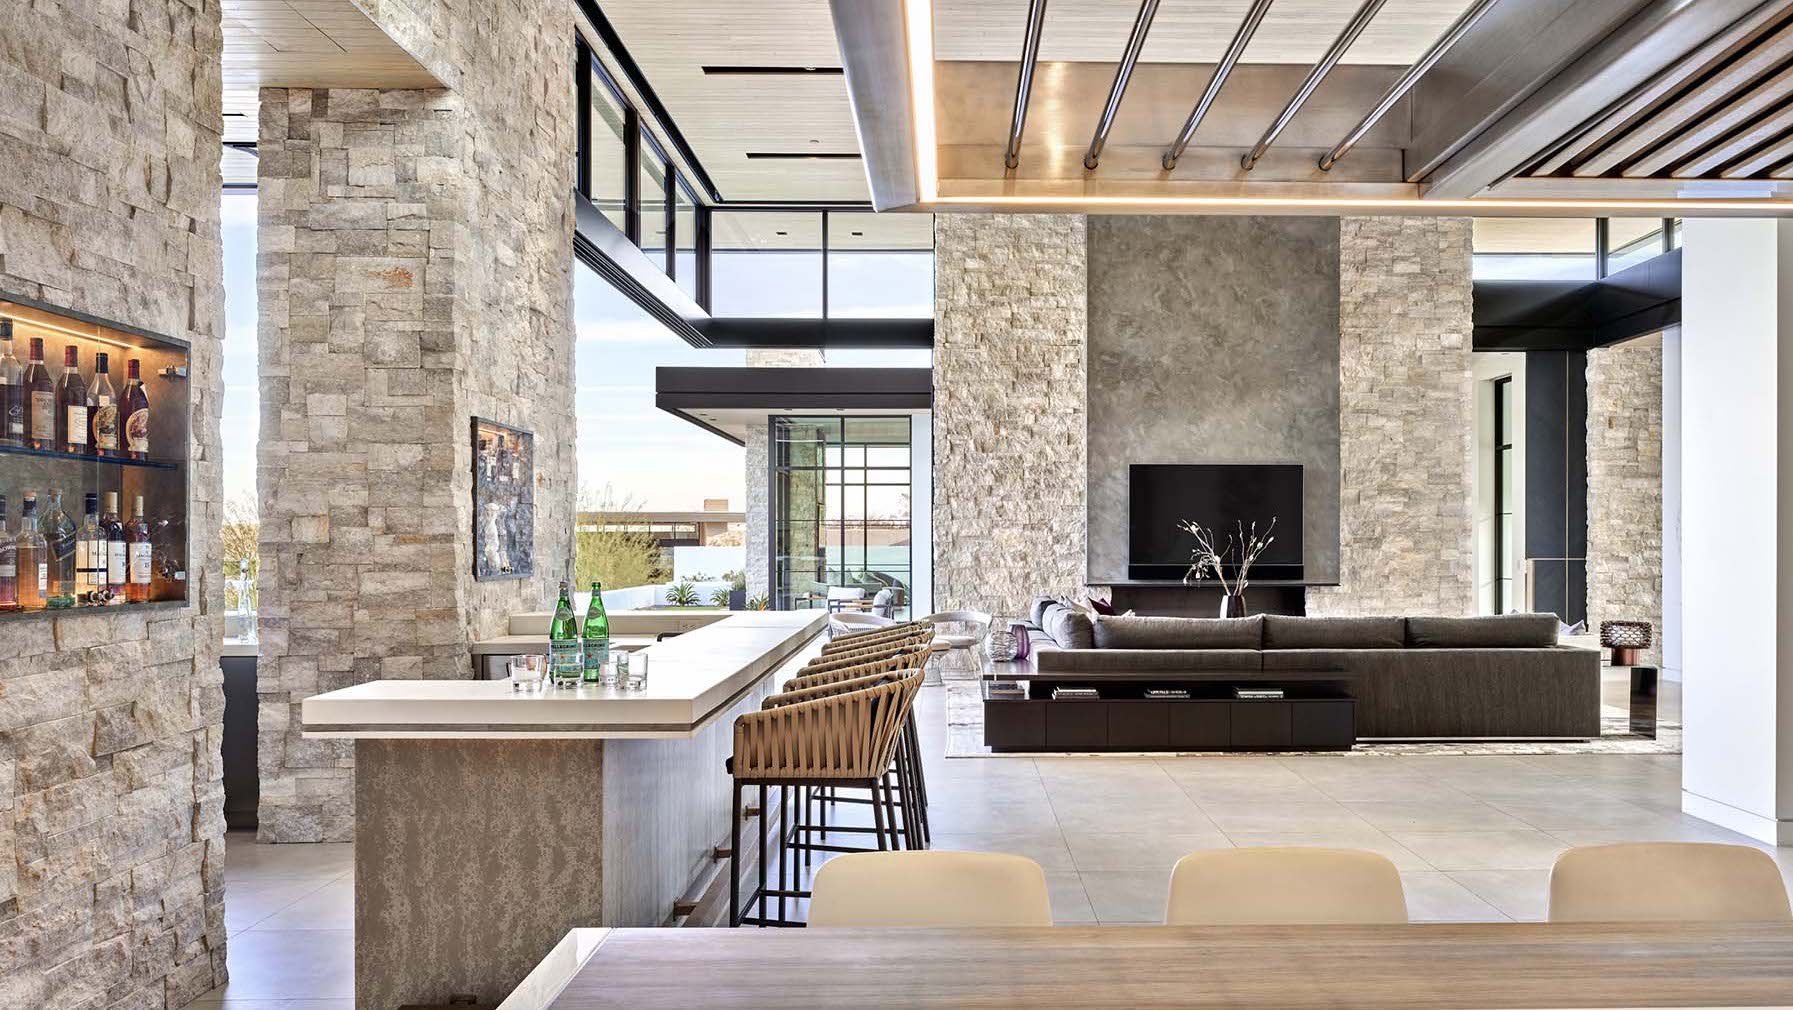 Feature3 Located in Scottsdale Ariz Drewett Works is an award winning architecture firm specializing in luxury residential hospitality and commercial architecture